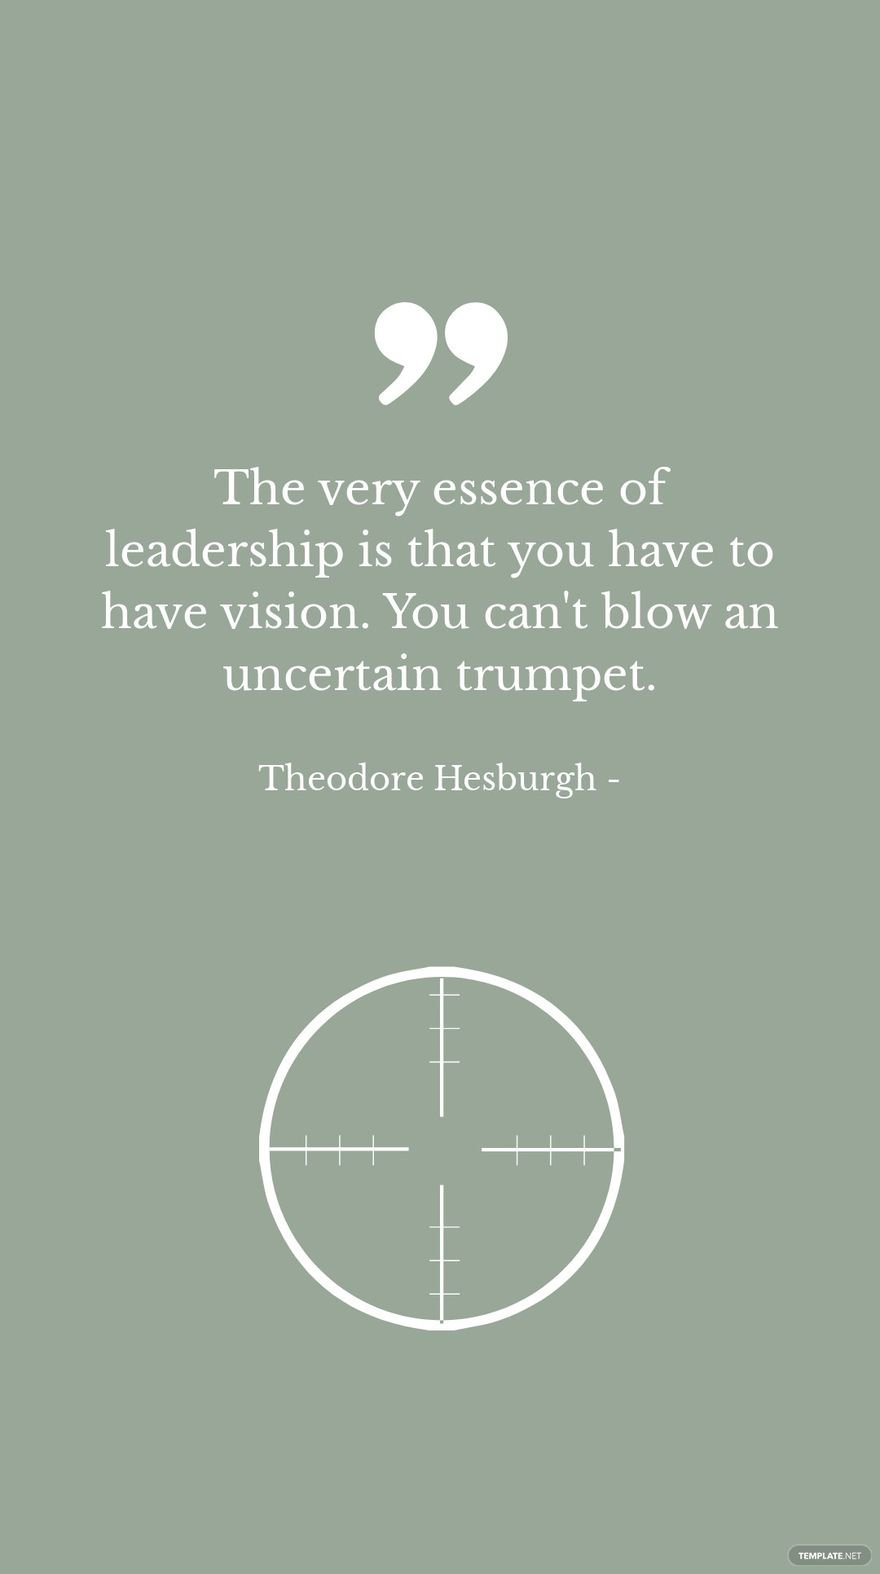 Theodore Hesburgh - The very essence of leadership is that you have to have vision. You can't blow an uncertain trumpet.